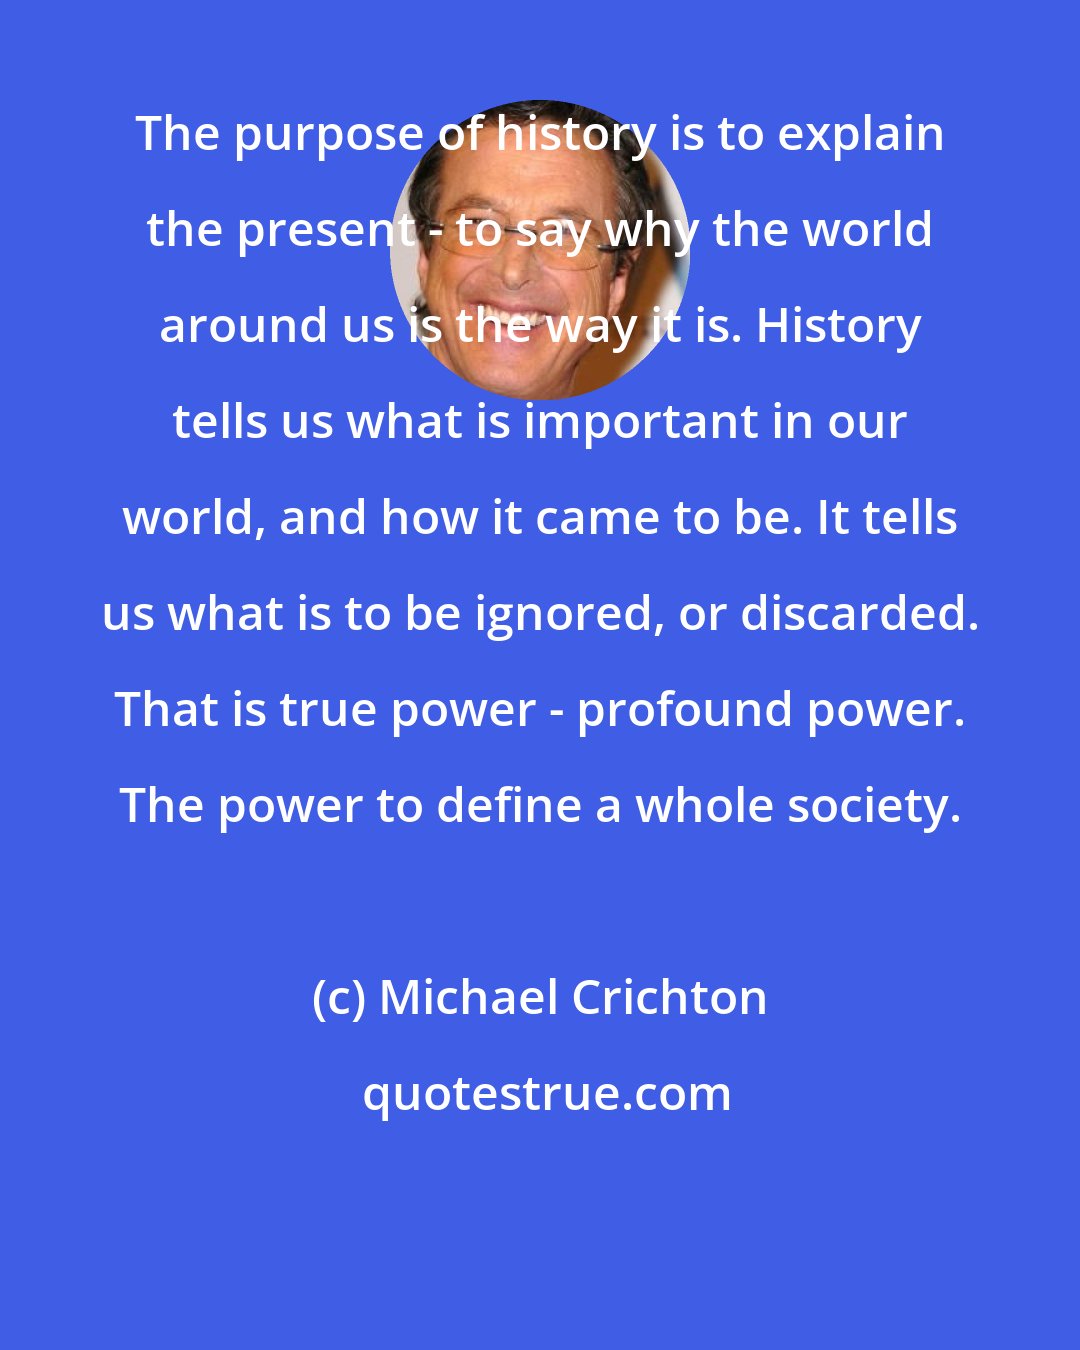 Michael Crichton: The purpose of history is to explain the present - to say why the world around us is the way it is. History tells us what is important in our world, and how it came to be. It tells us what is to be ignored, or discarded. That is true power - profound power. The power to define a whole society.